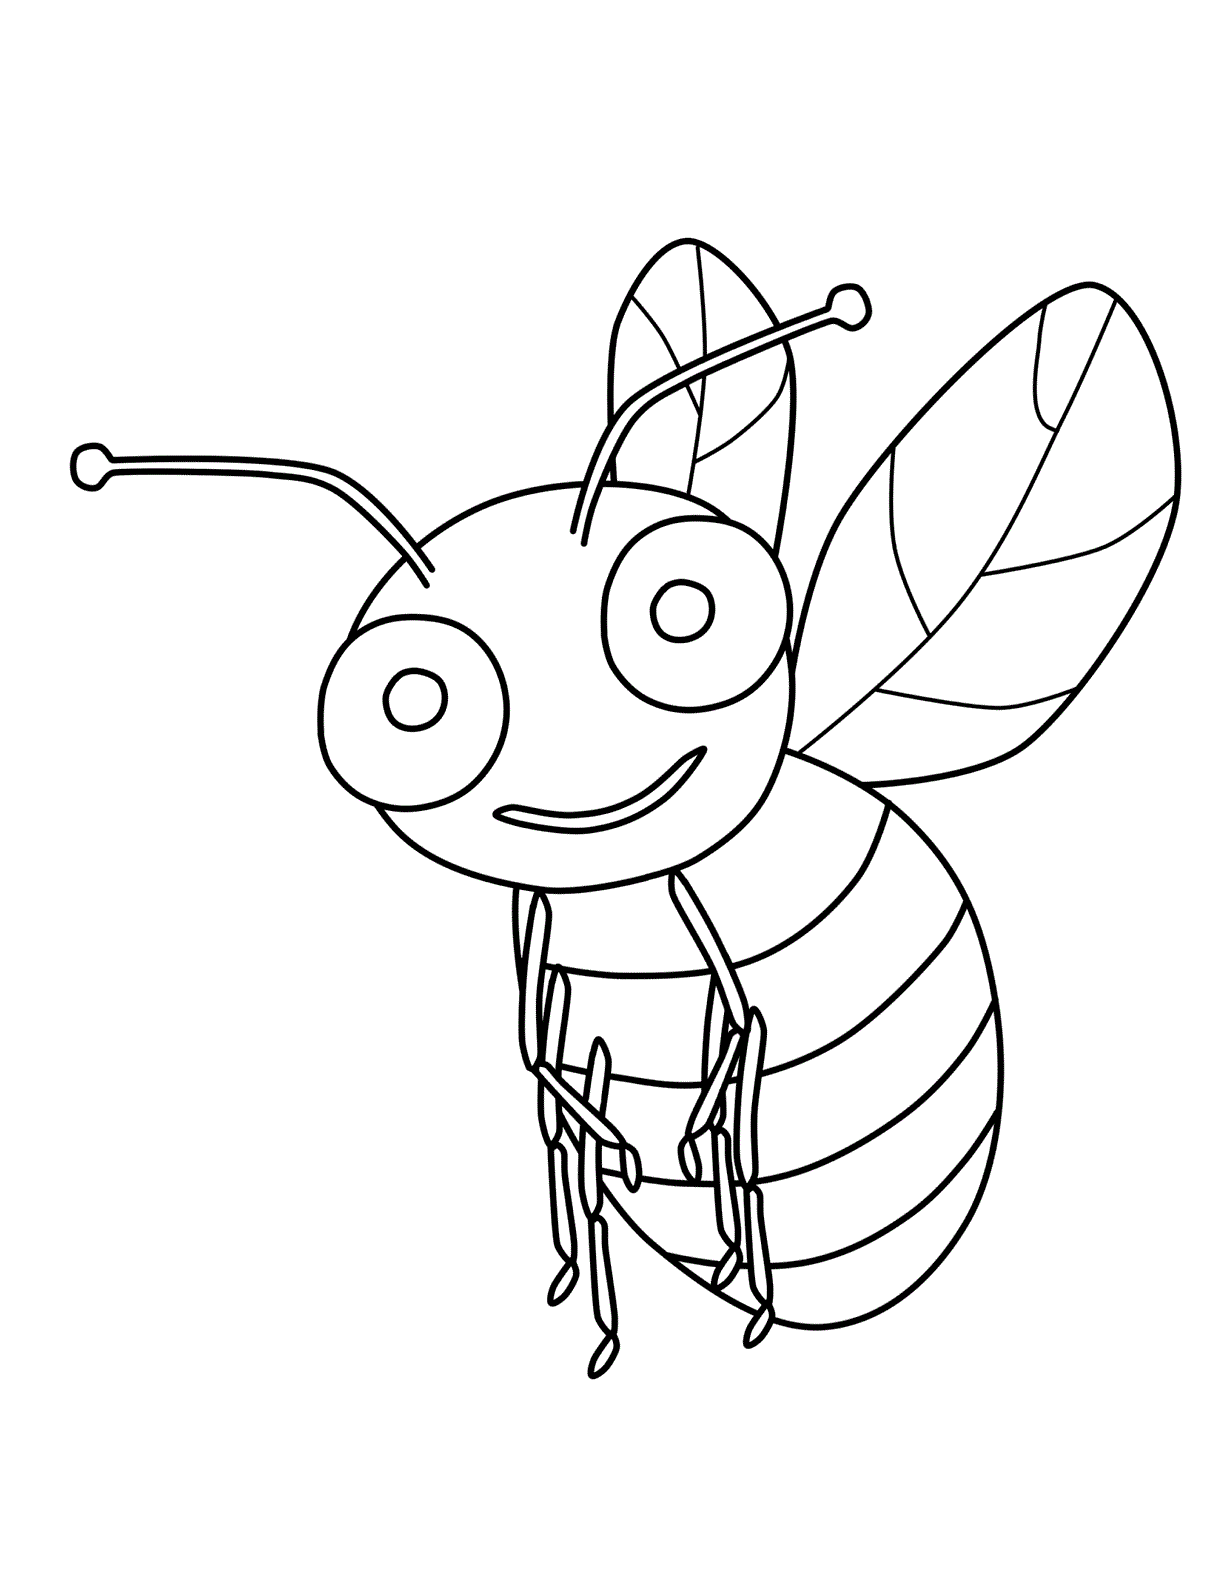 Coloring Pages For Kids Printable Free 9